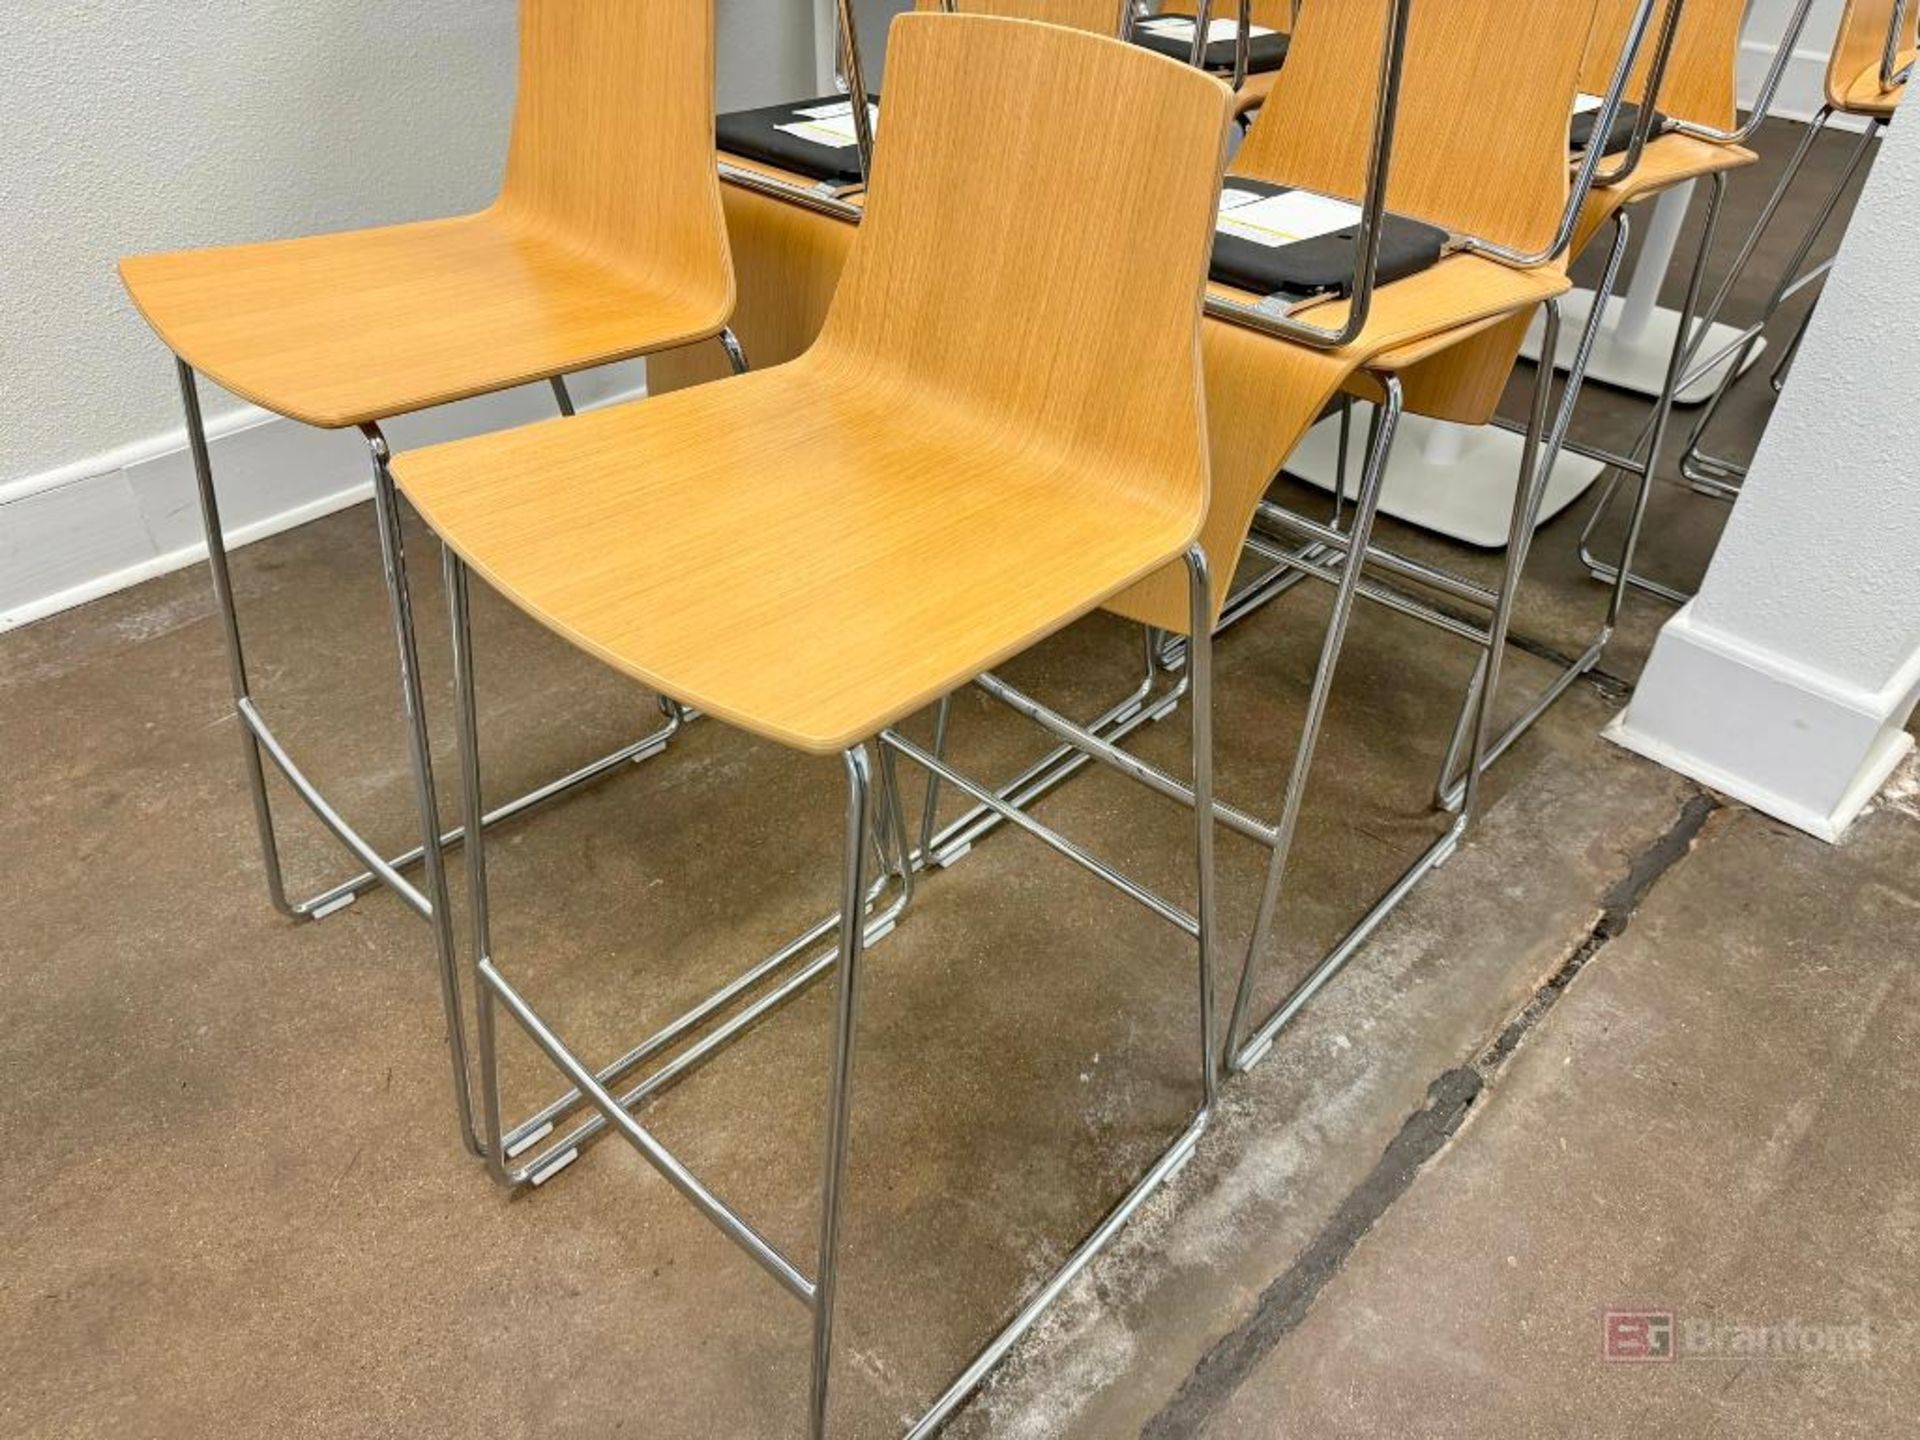 Lot of (8) White Bar Height Tables w/ (16) Wood Seat Chairs - Image 5 of 6